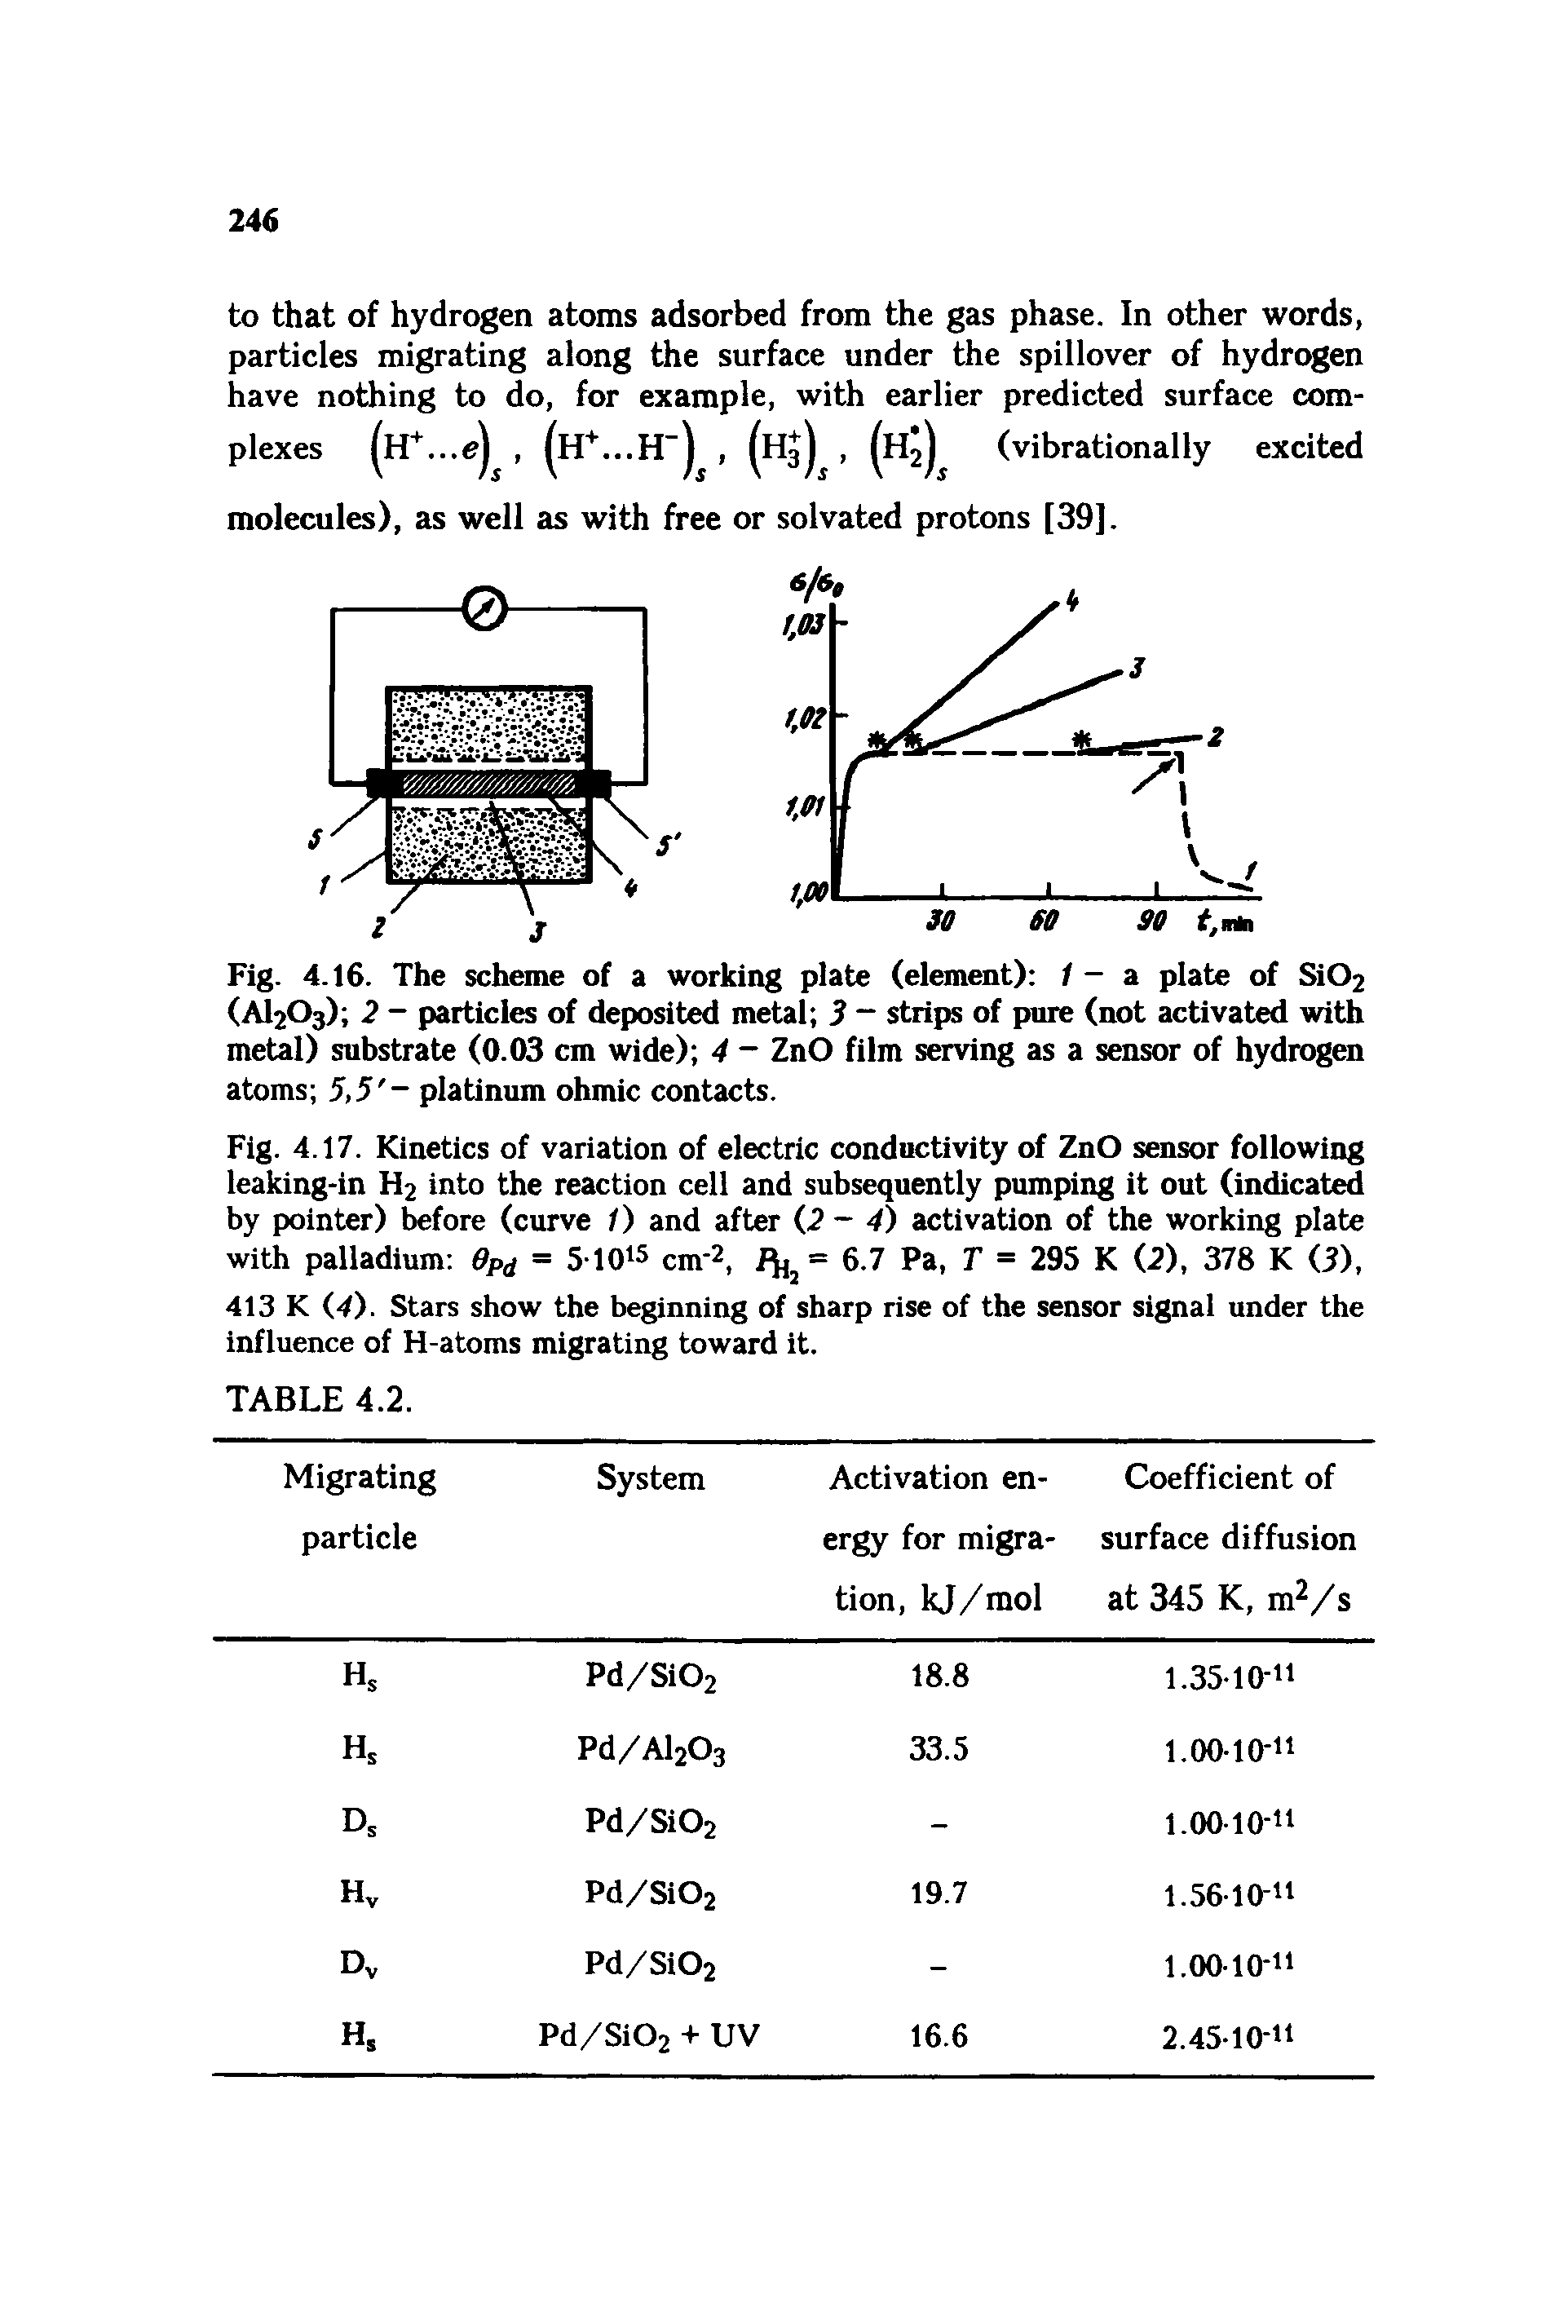 Fig. 4.16. The scheme of a working plate (element) / - a plate of Si02 (AI2O3) 2 - particles of deposited metal 3 strips of pure (not activated with metal) substrate (0.03 cm wide) 4 - ZnO film serving as a sensor of hydrogen atoms 5,5 - platinum ohmic contacts.